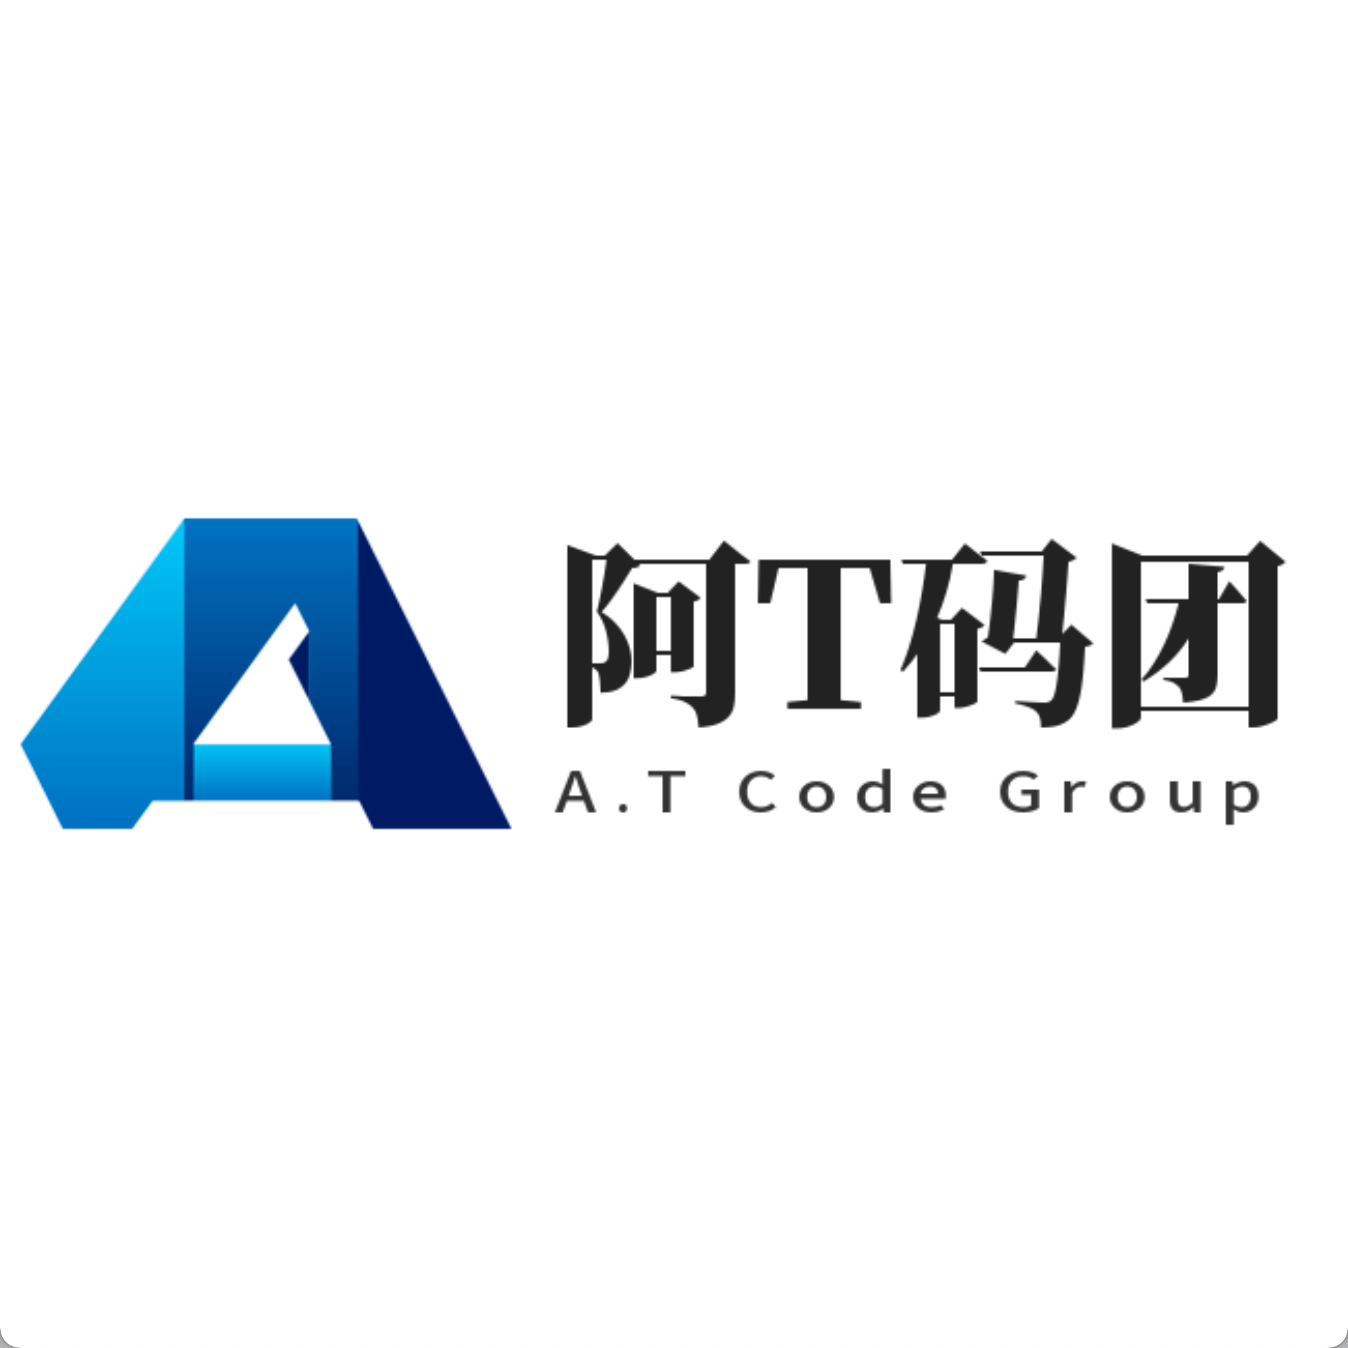 A_t-code-group